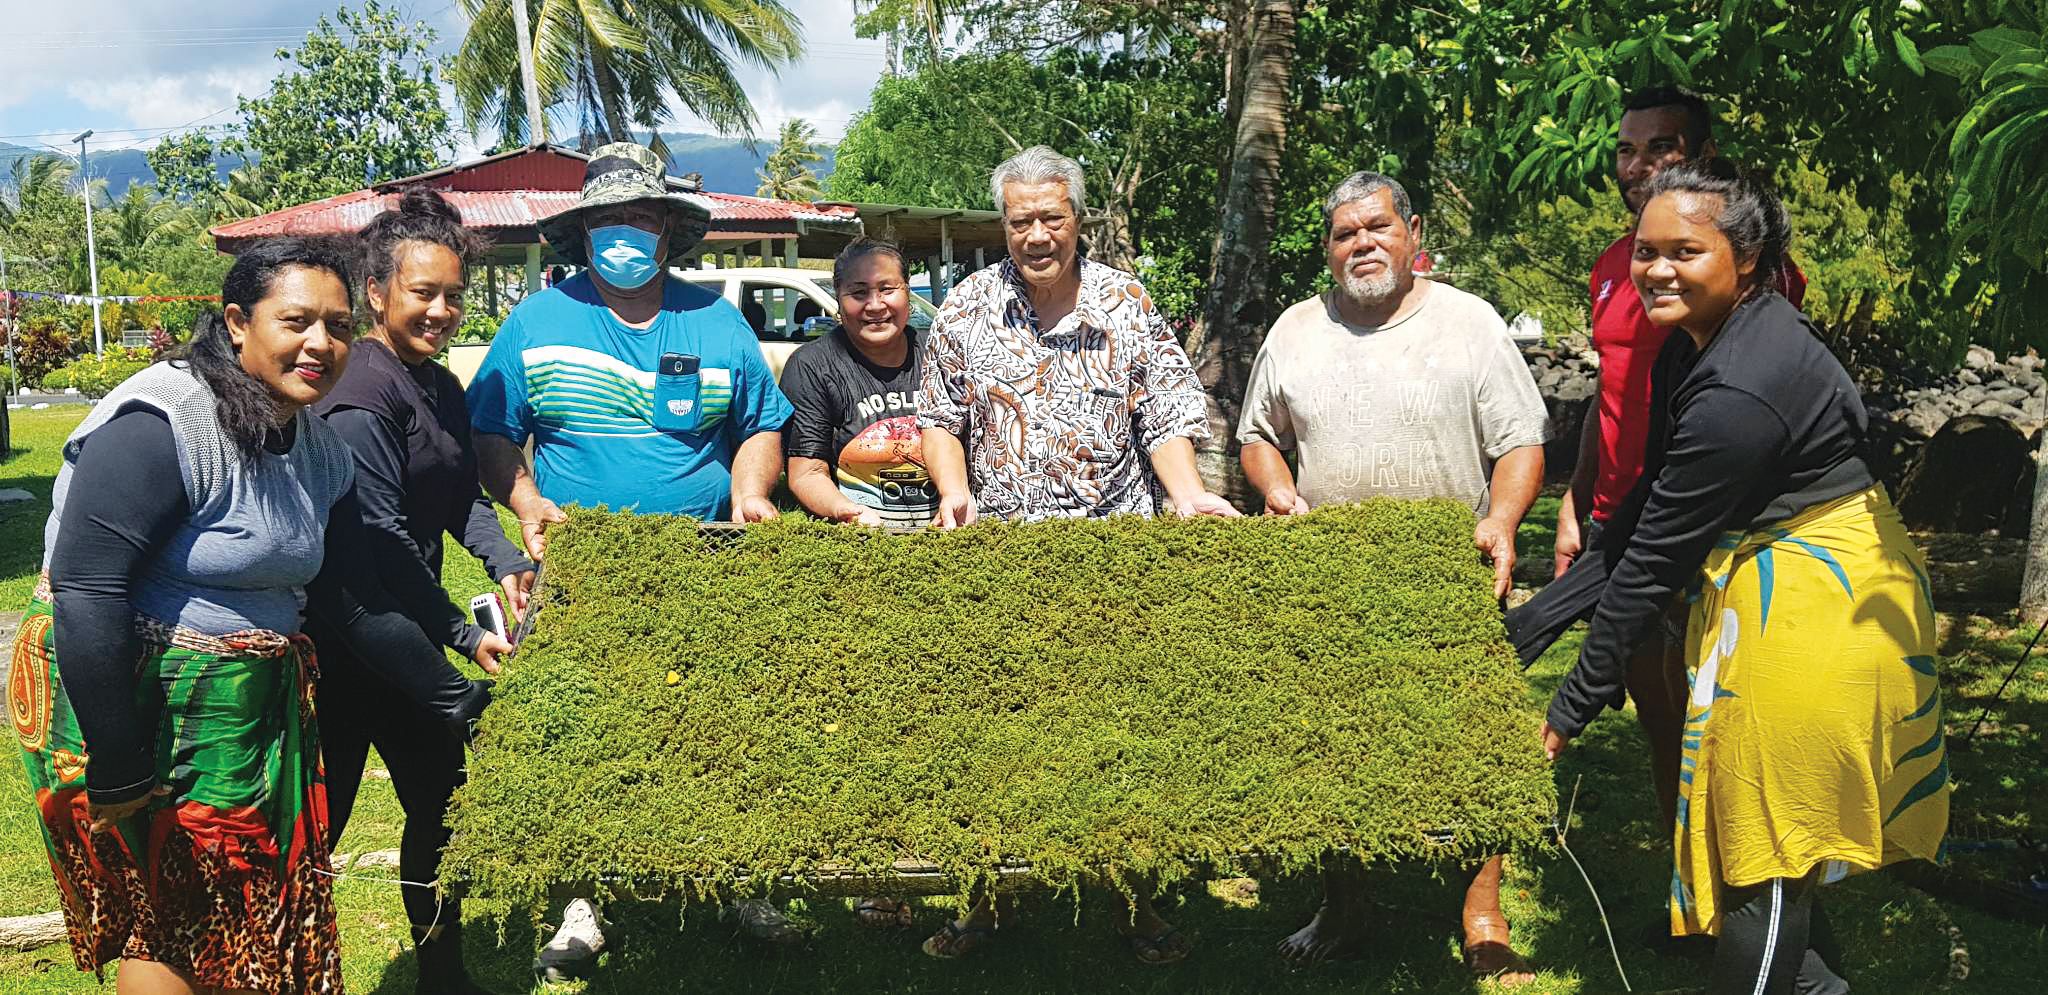 A group of people displaying a large piece of green sea grapes